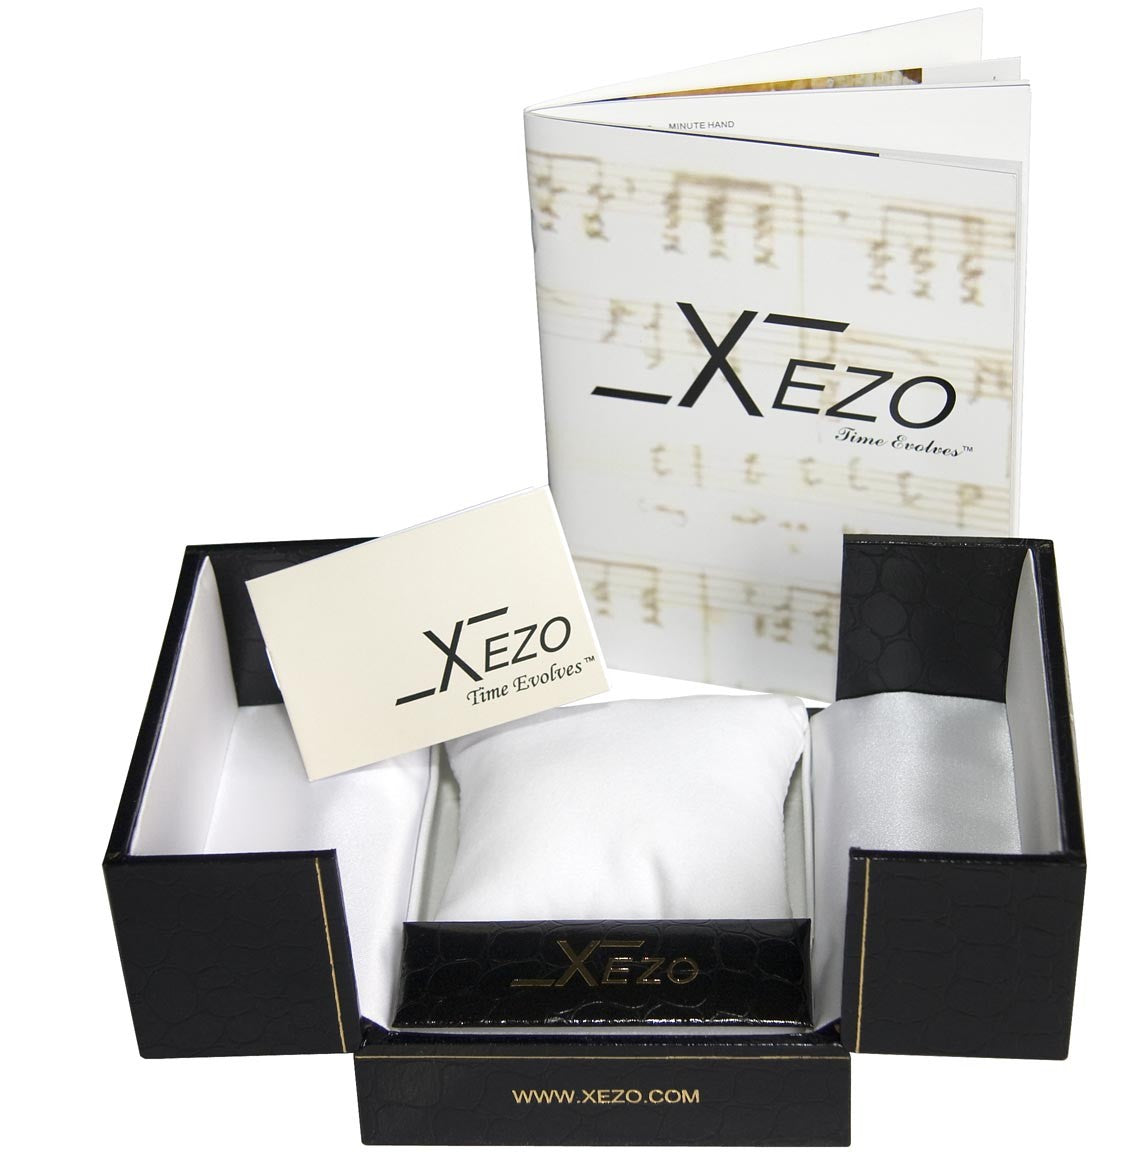 Xezo - Black gift box, certificate and manual of the Architect 2001 LD Tank watch